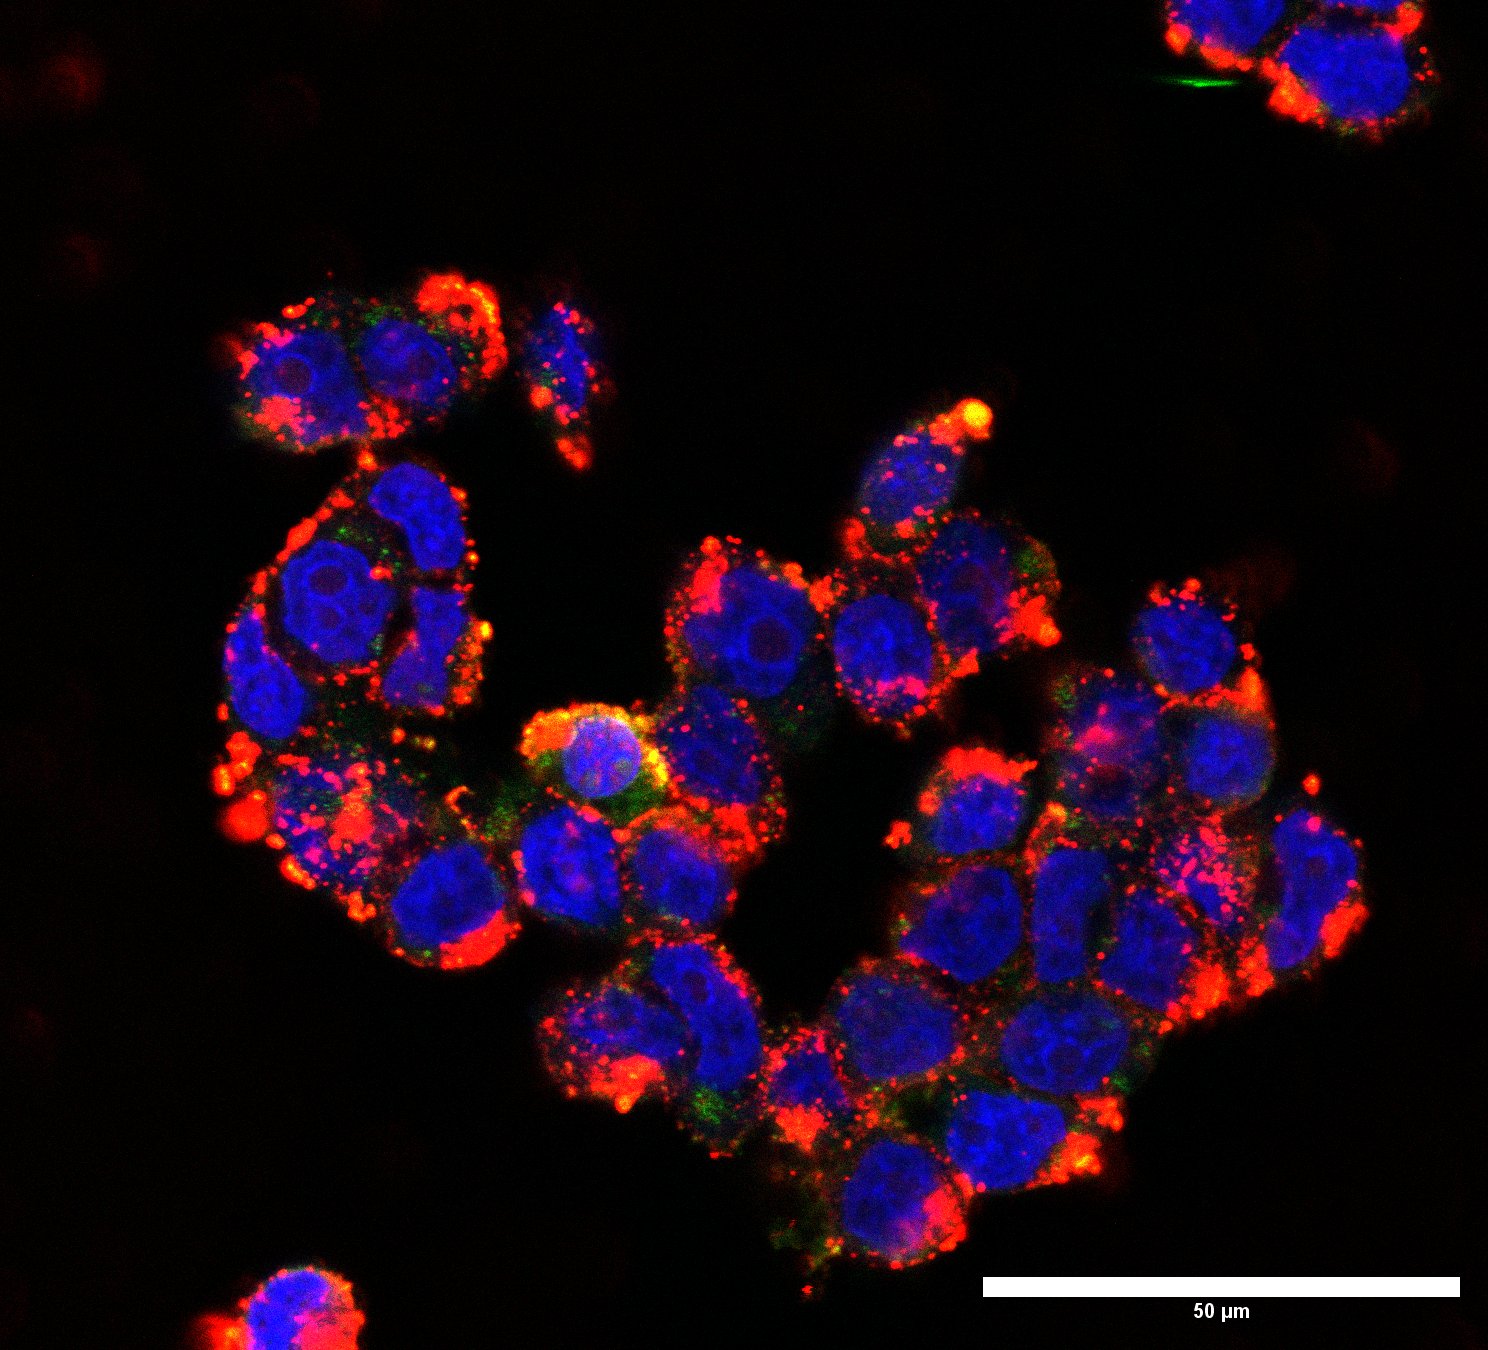 Here we can see the medulloblastoma cells following nanoparticle delivery of AF647 siRNA. The cells nuclei are shown in blue and the abundance of siRNA in the cytoplasm of cells is shown in red.